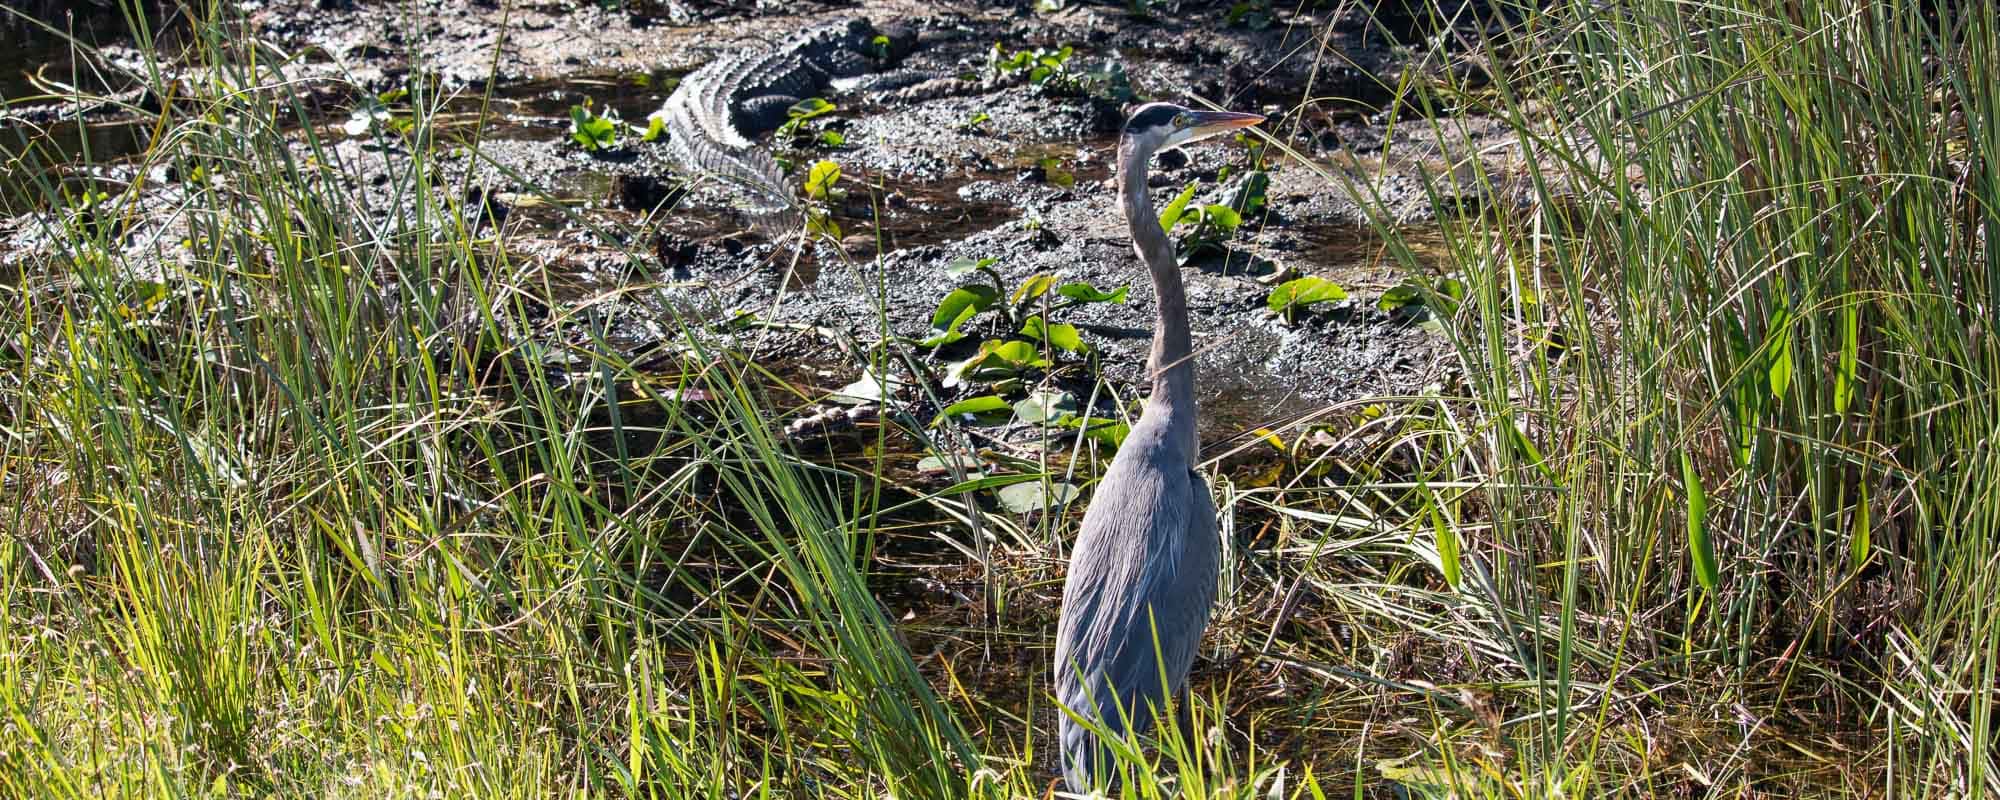 Everglades National Park - Alligator and great blue heron on the Shark Valley Tram Road